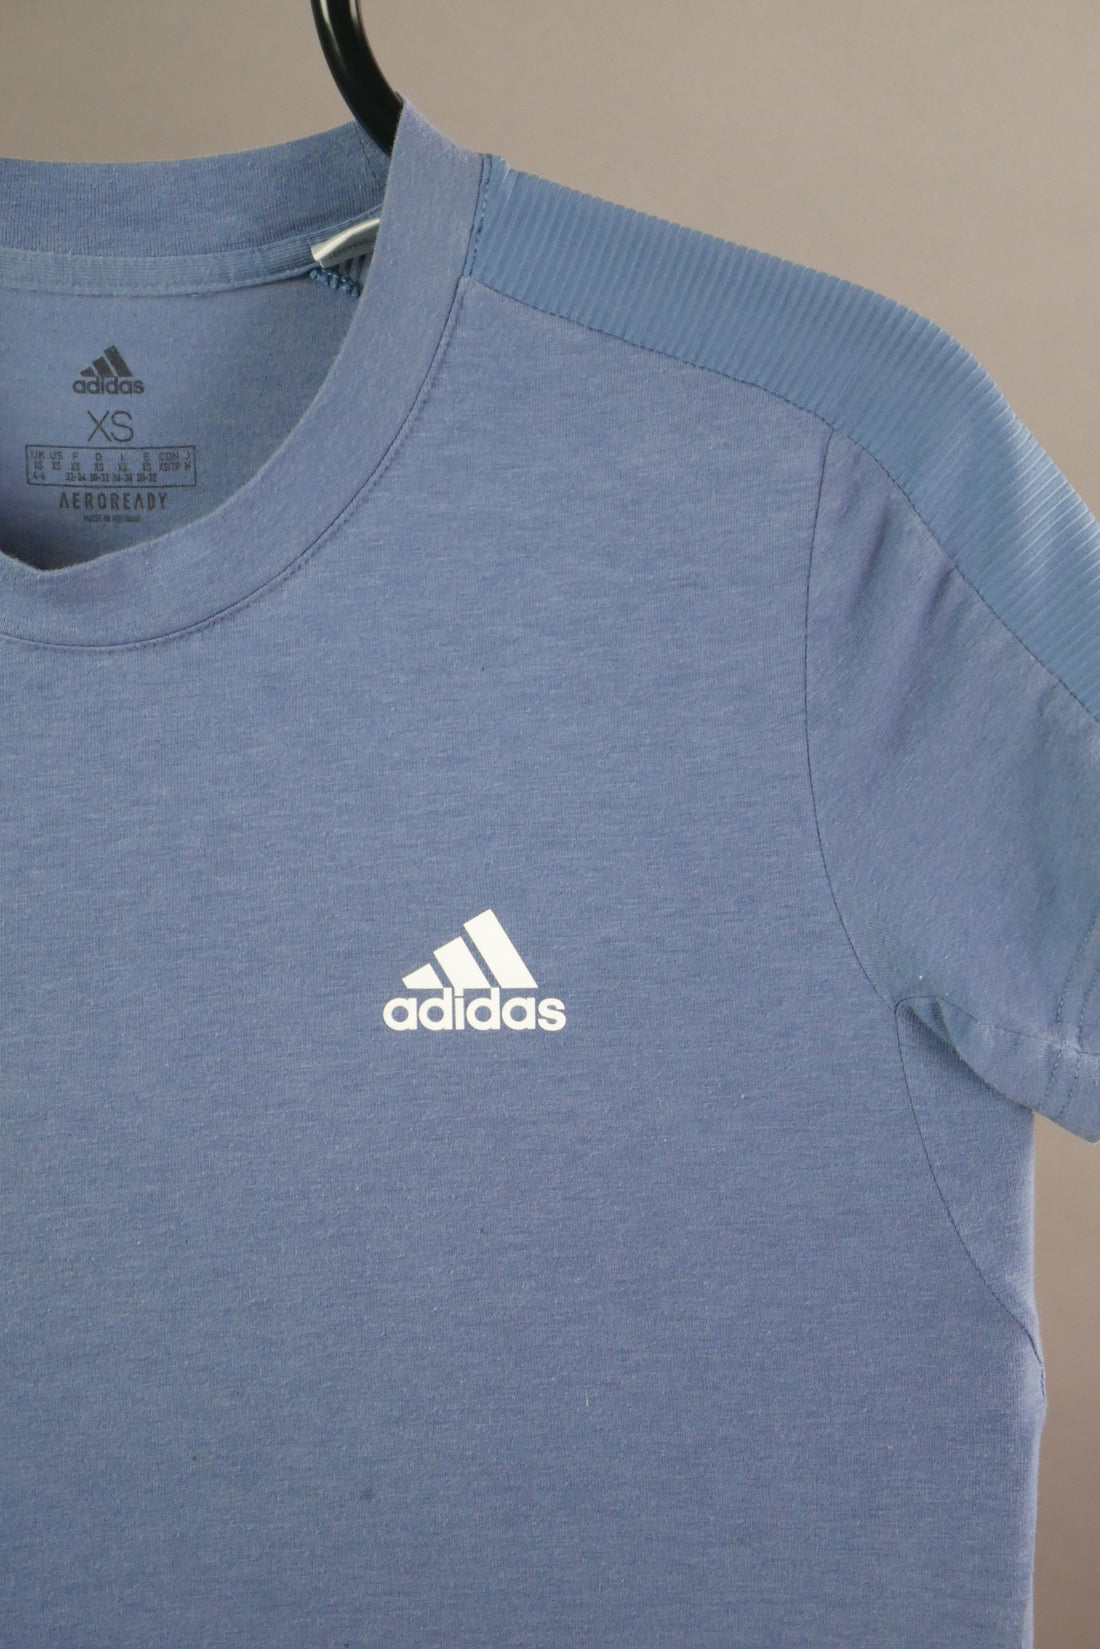 The Adidas Athletic T-shirt (XS)